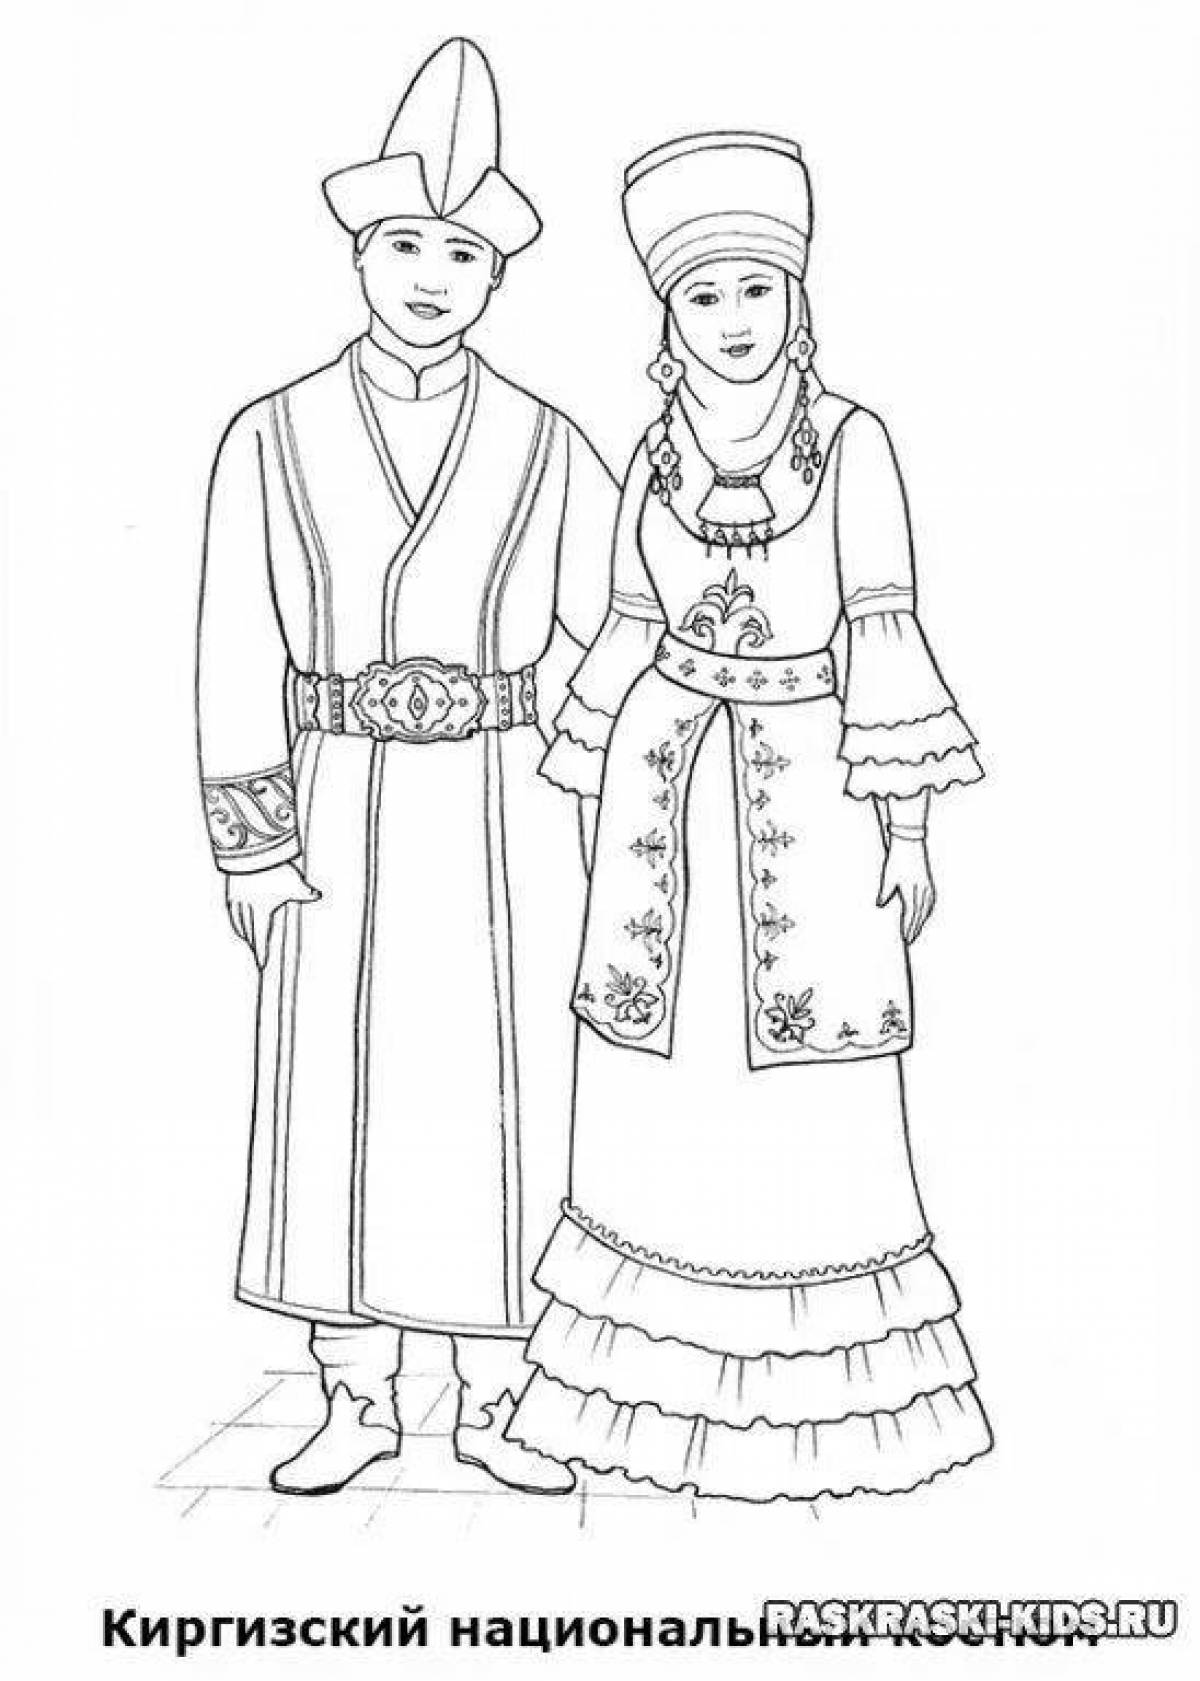 Fine national costumes coloring book